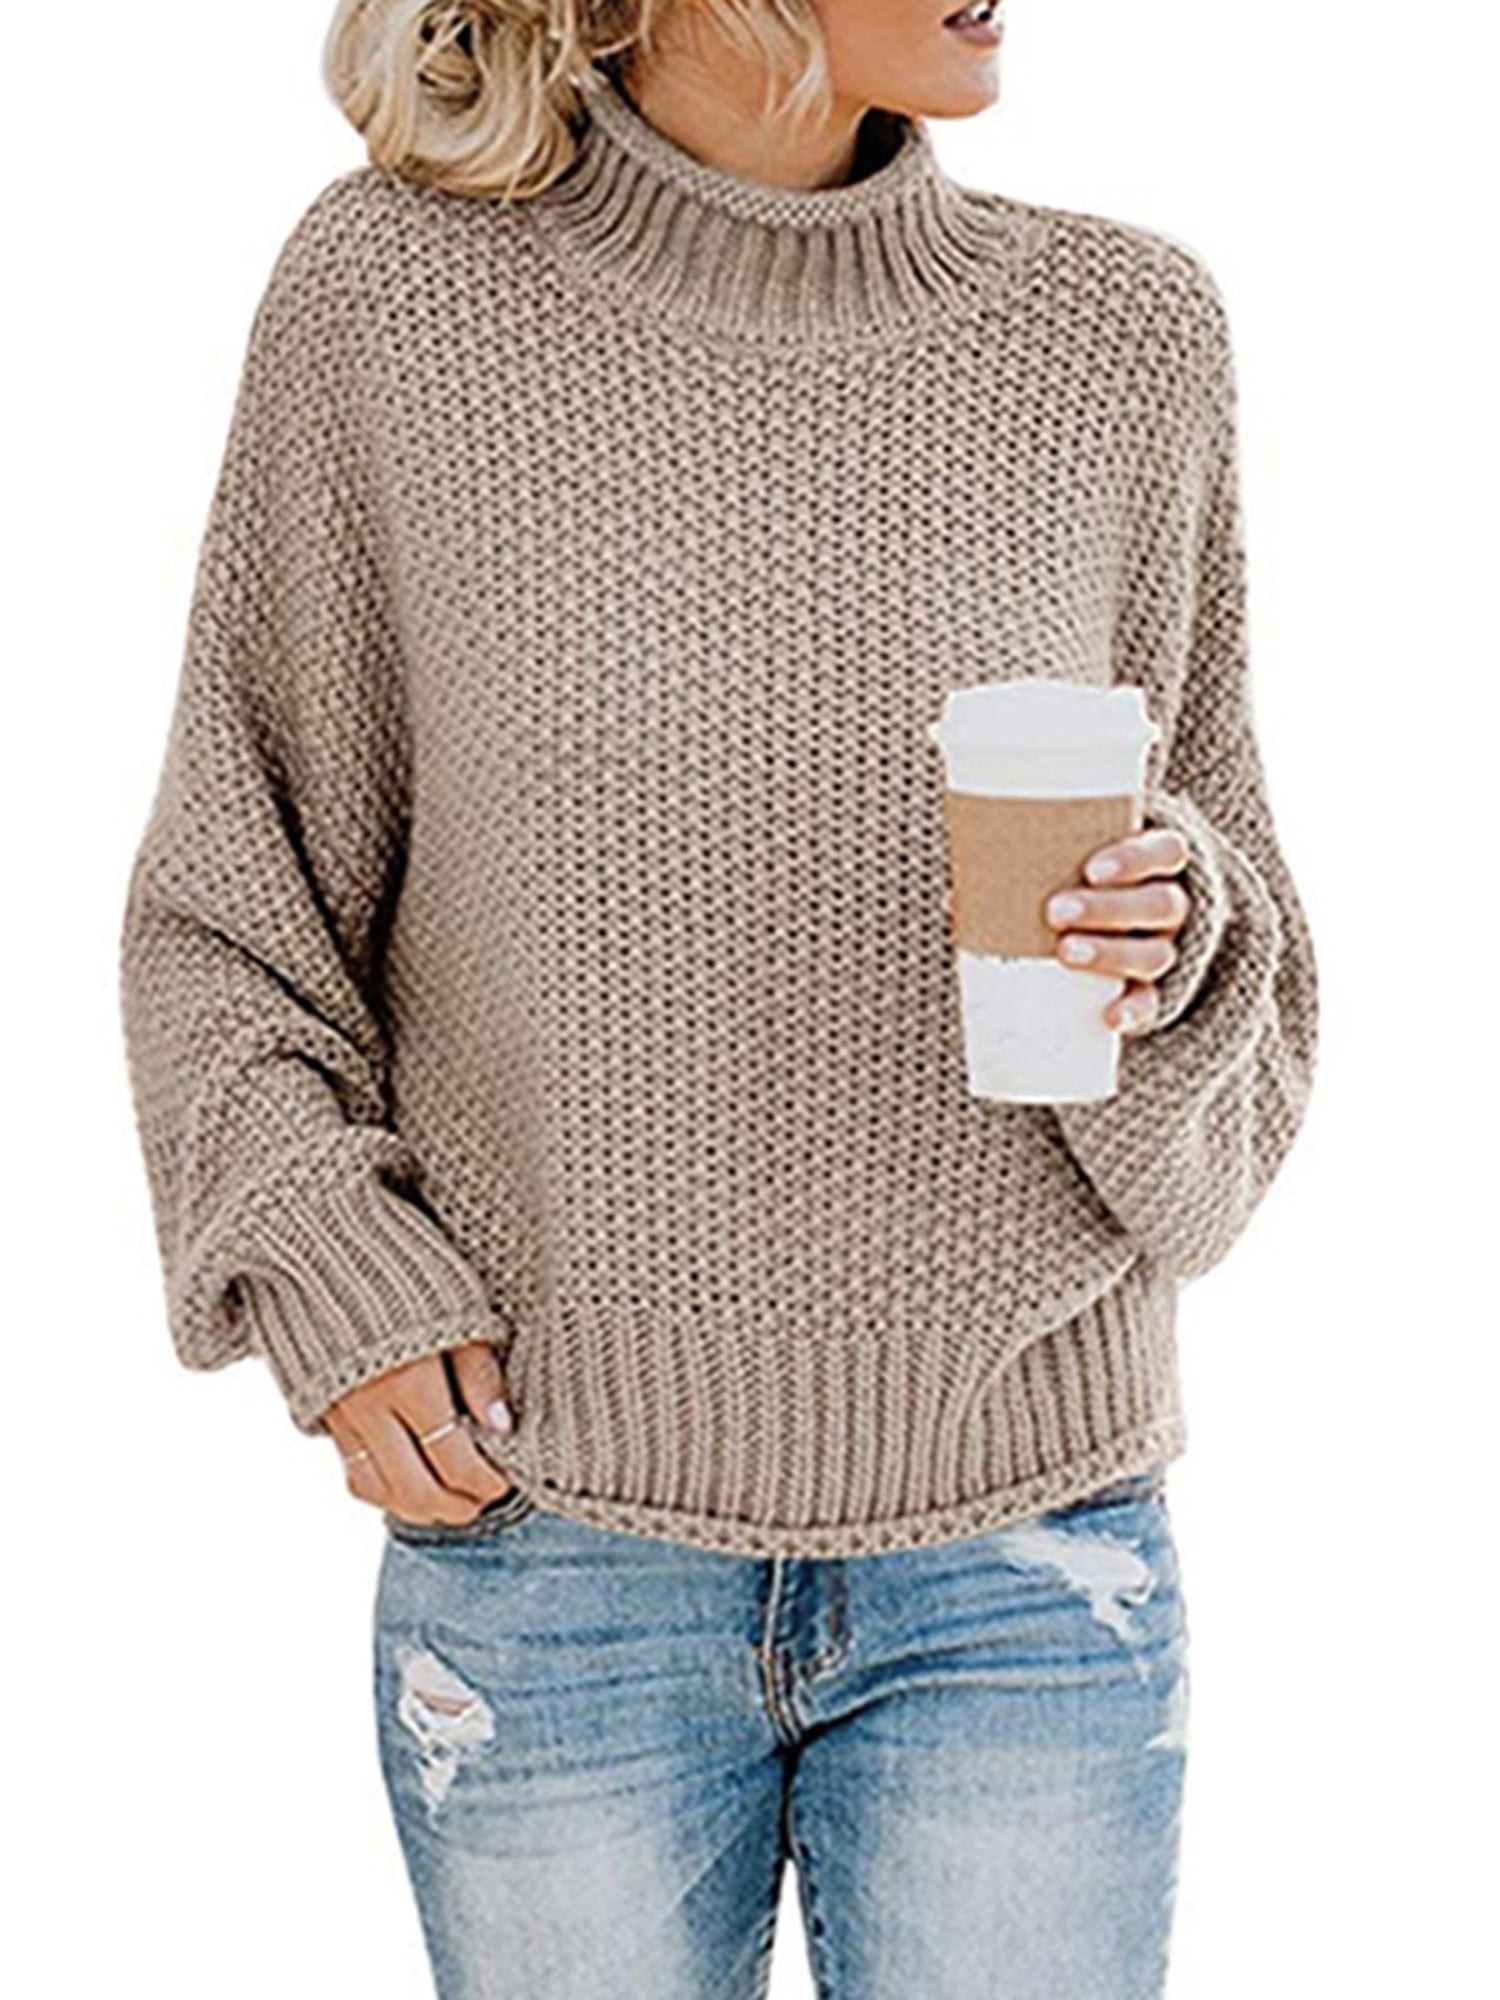 Wodstyle - Women's Long Sleeve Sweaters Turtleneck Loose Soft Knitted  Casual Pullover - Walmart.com - Walmart.com